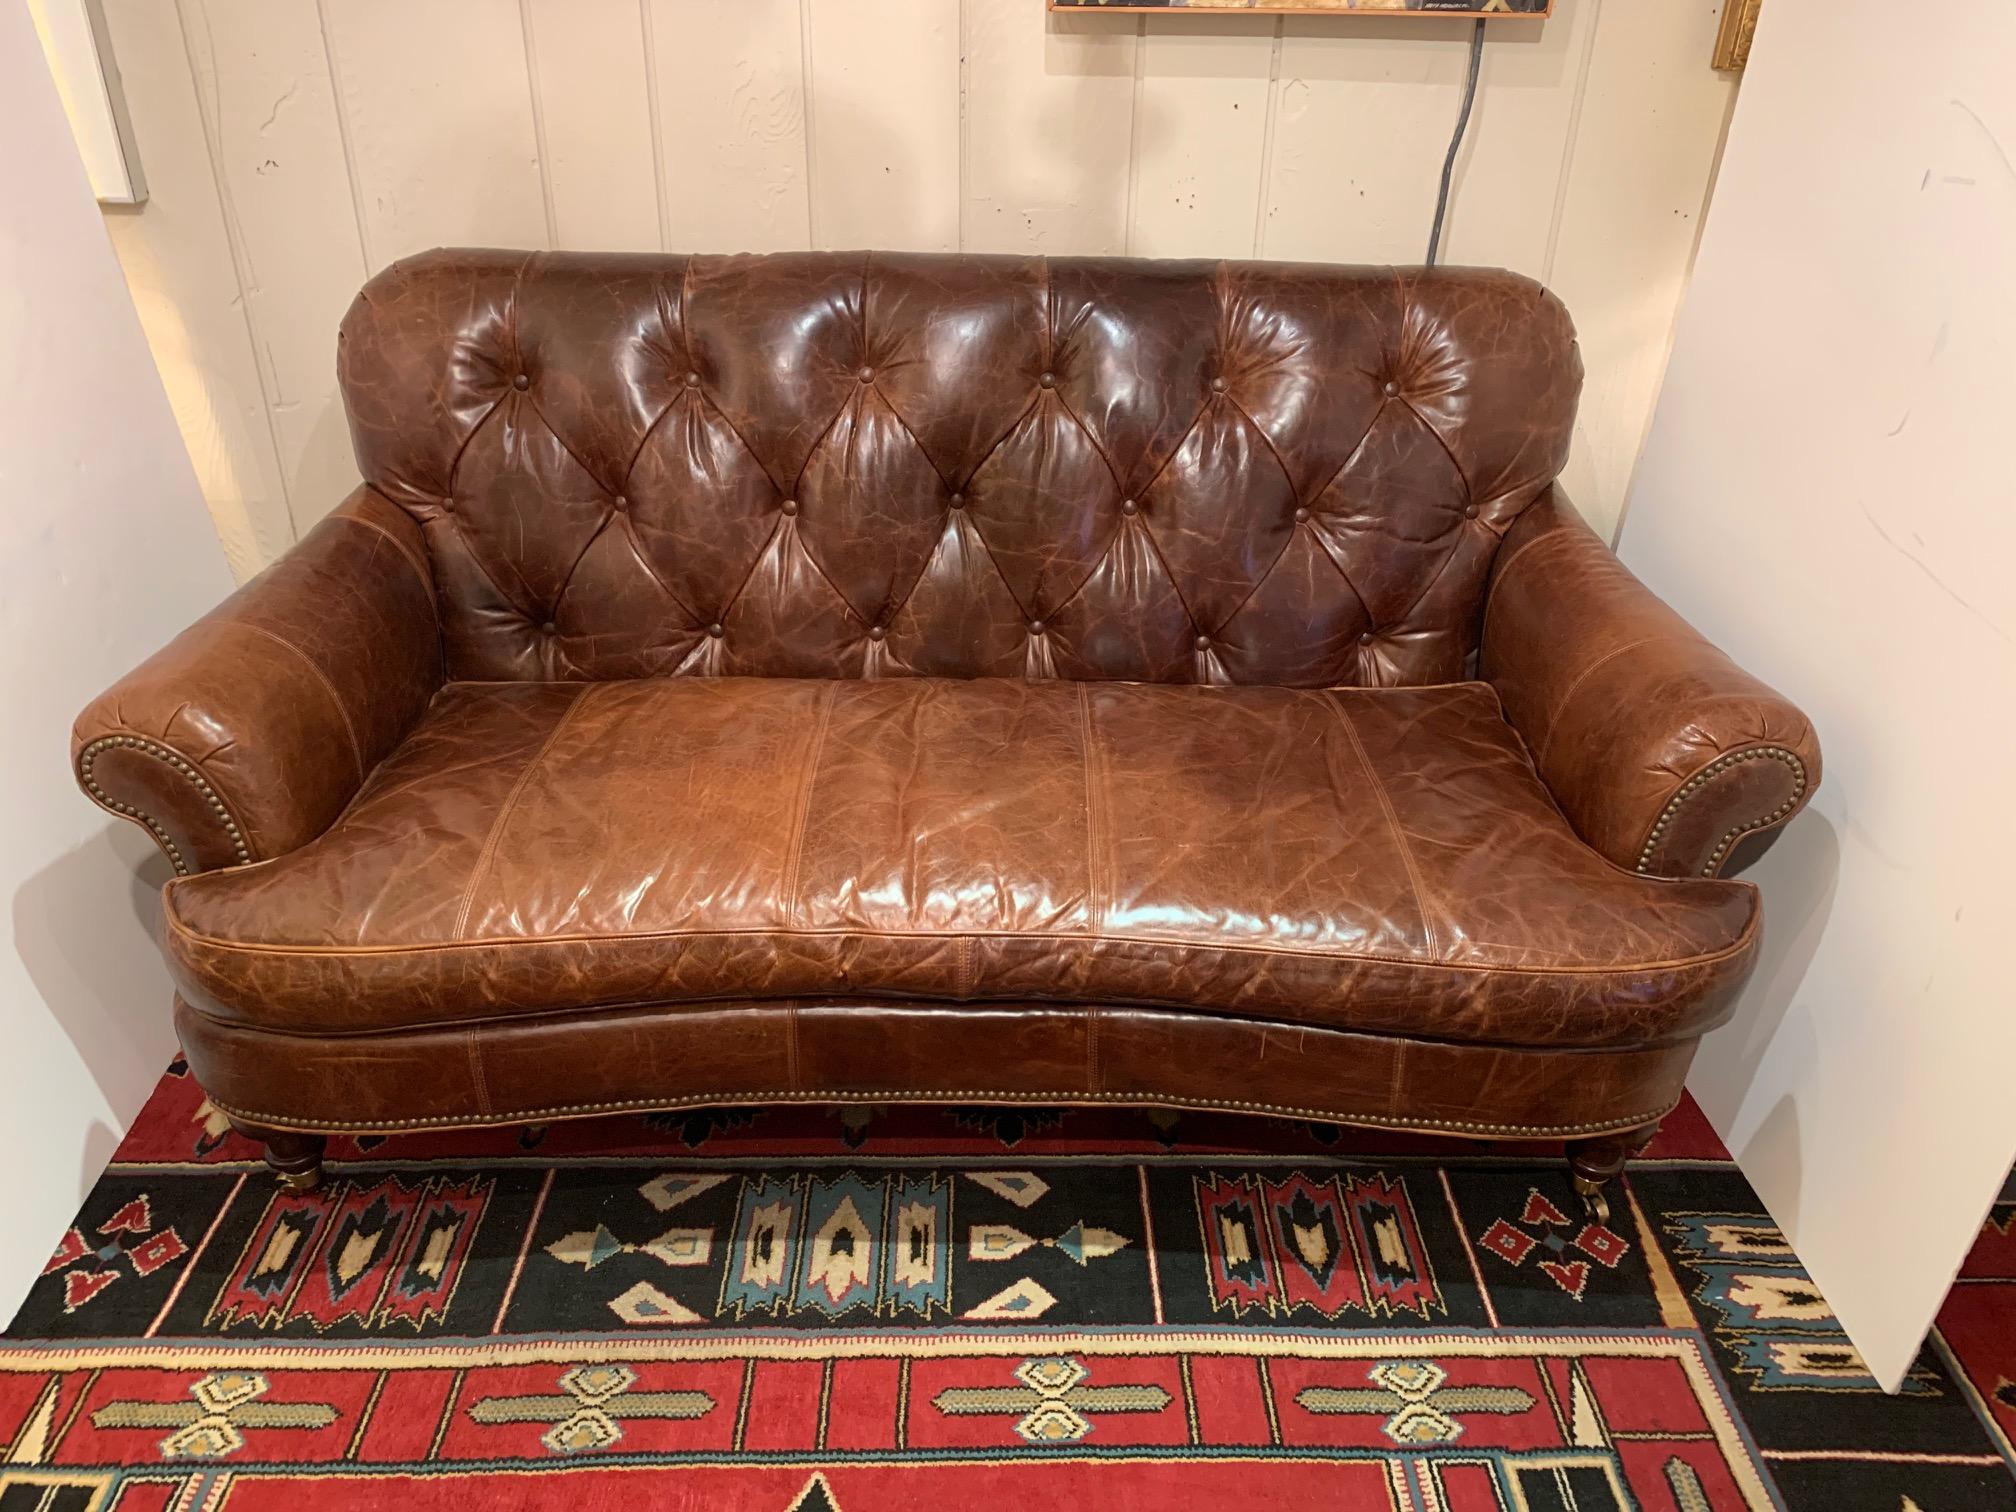 Delicious traditional supple brown tufted leather loveseat having mahogany turned legs on brass casters and brass nailhead details.
Measures: Seat depth 22
Arm height 24.5.